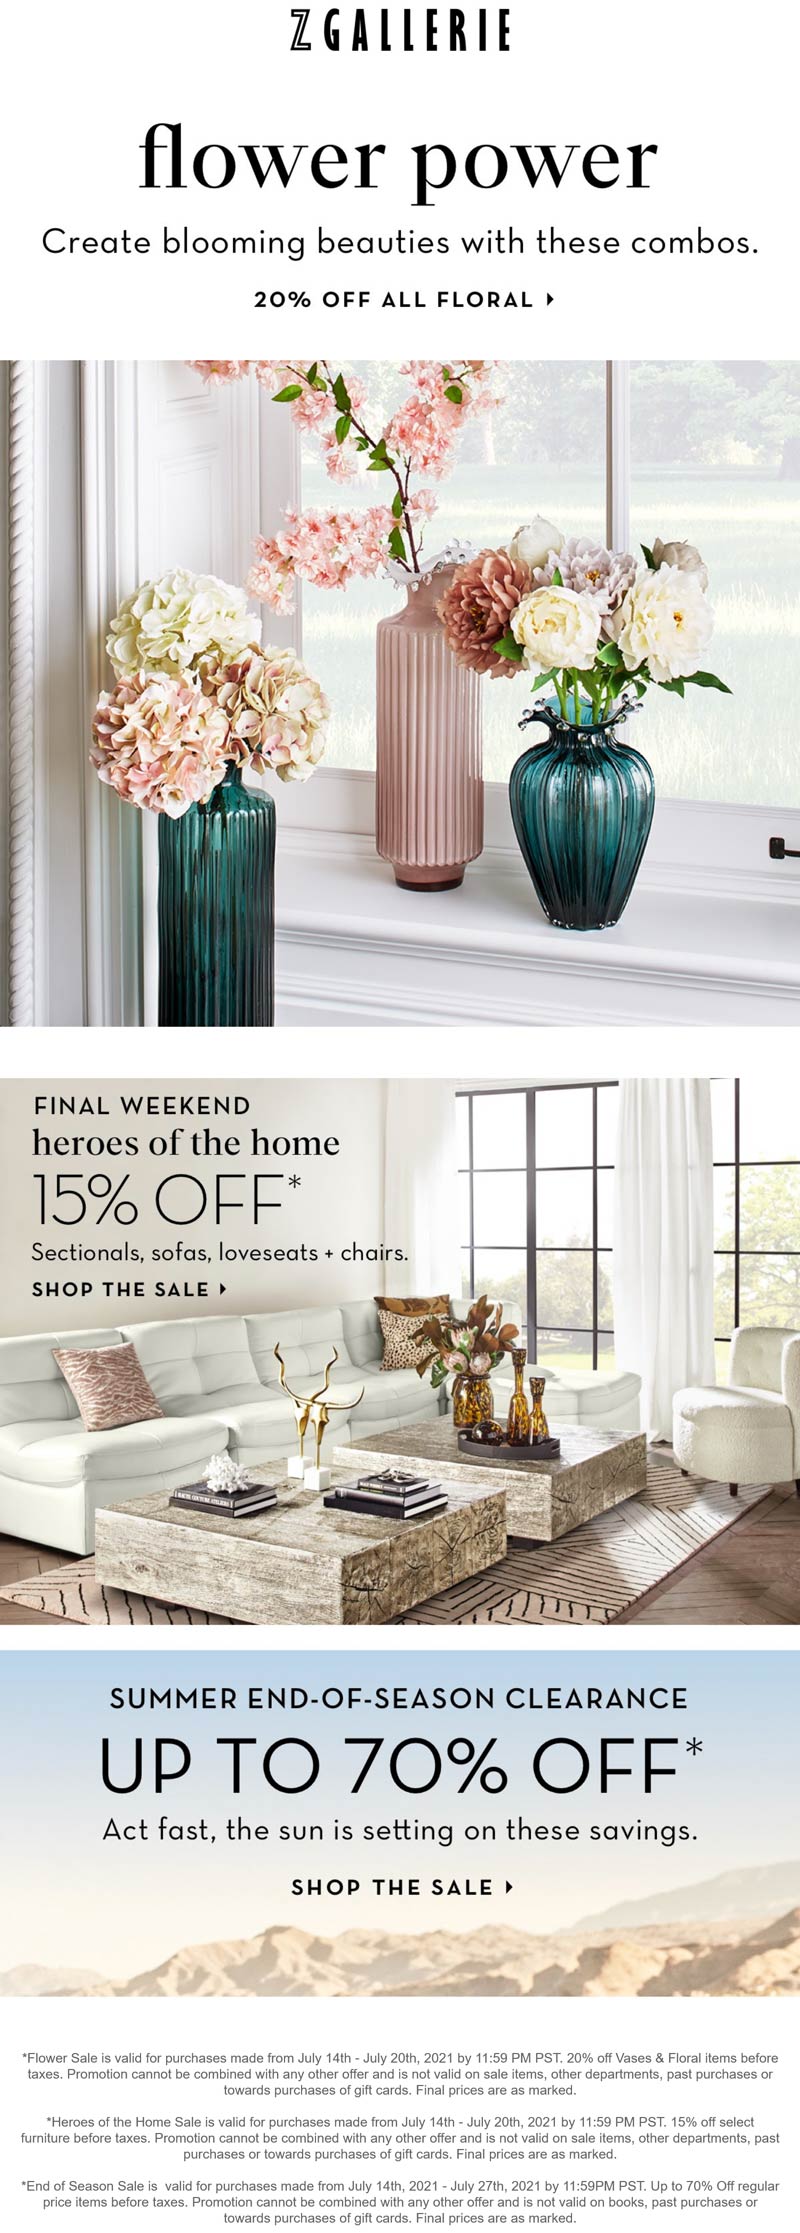 Z Gallerie stores Coupon  15% off couches & 20% off floral today at Z Gallerie #zgallerie 